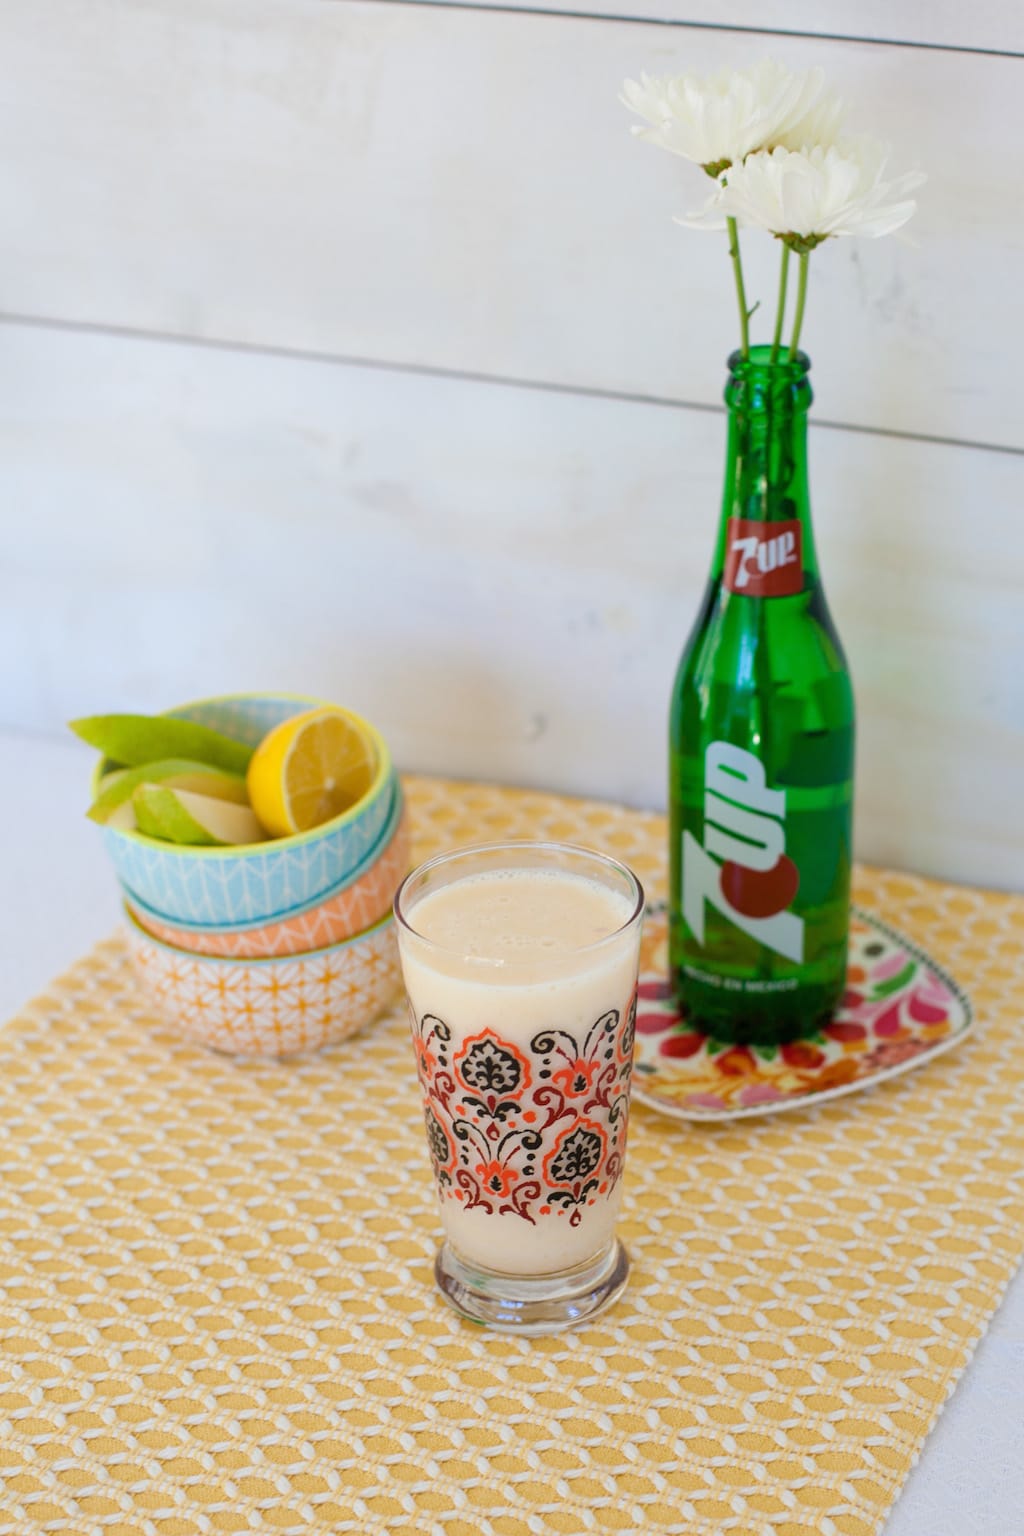 Ditch your morning coffee routine and give this new Here Comes The Sun Smoothie a try!